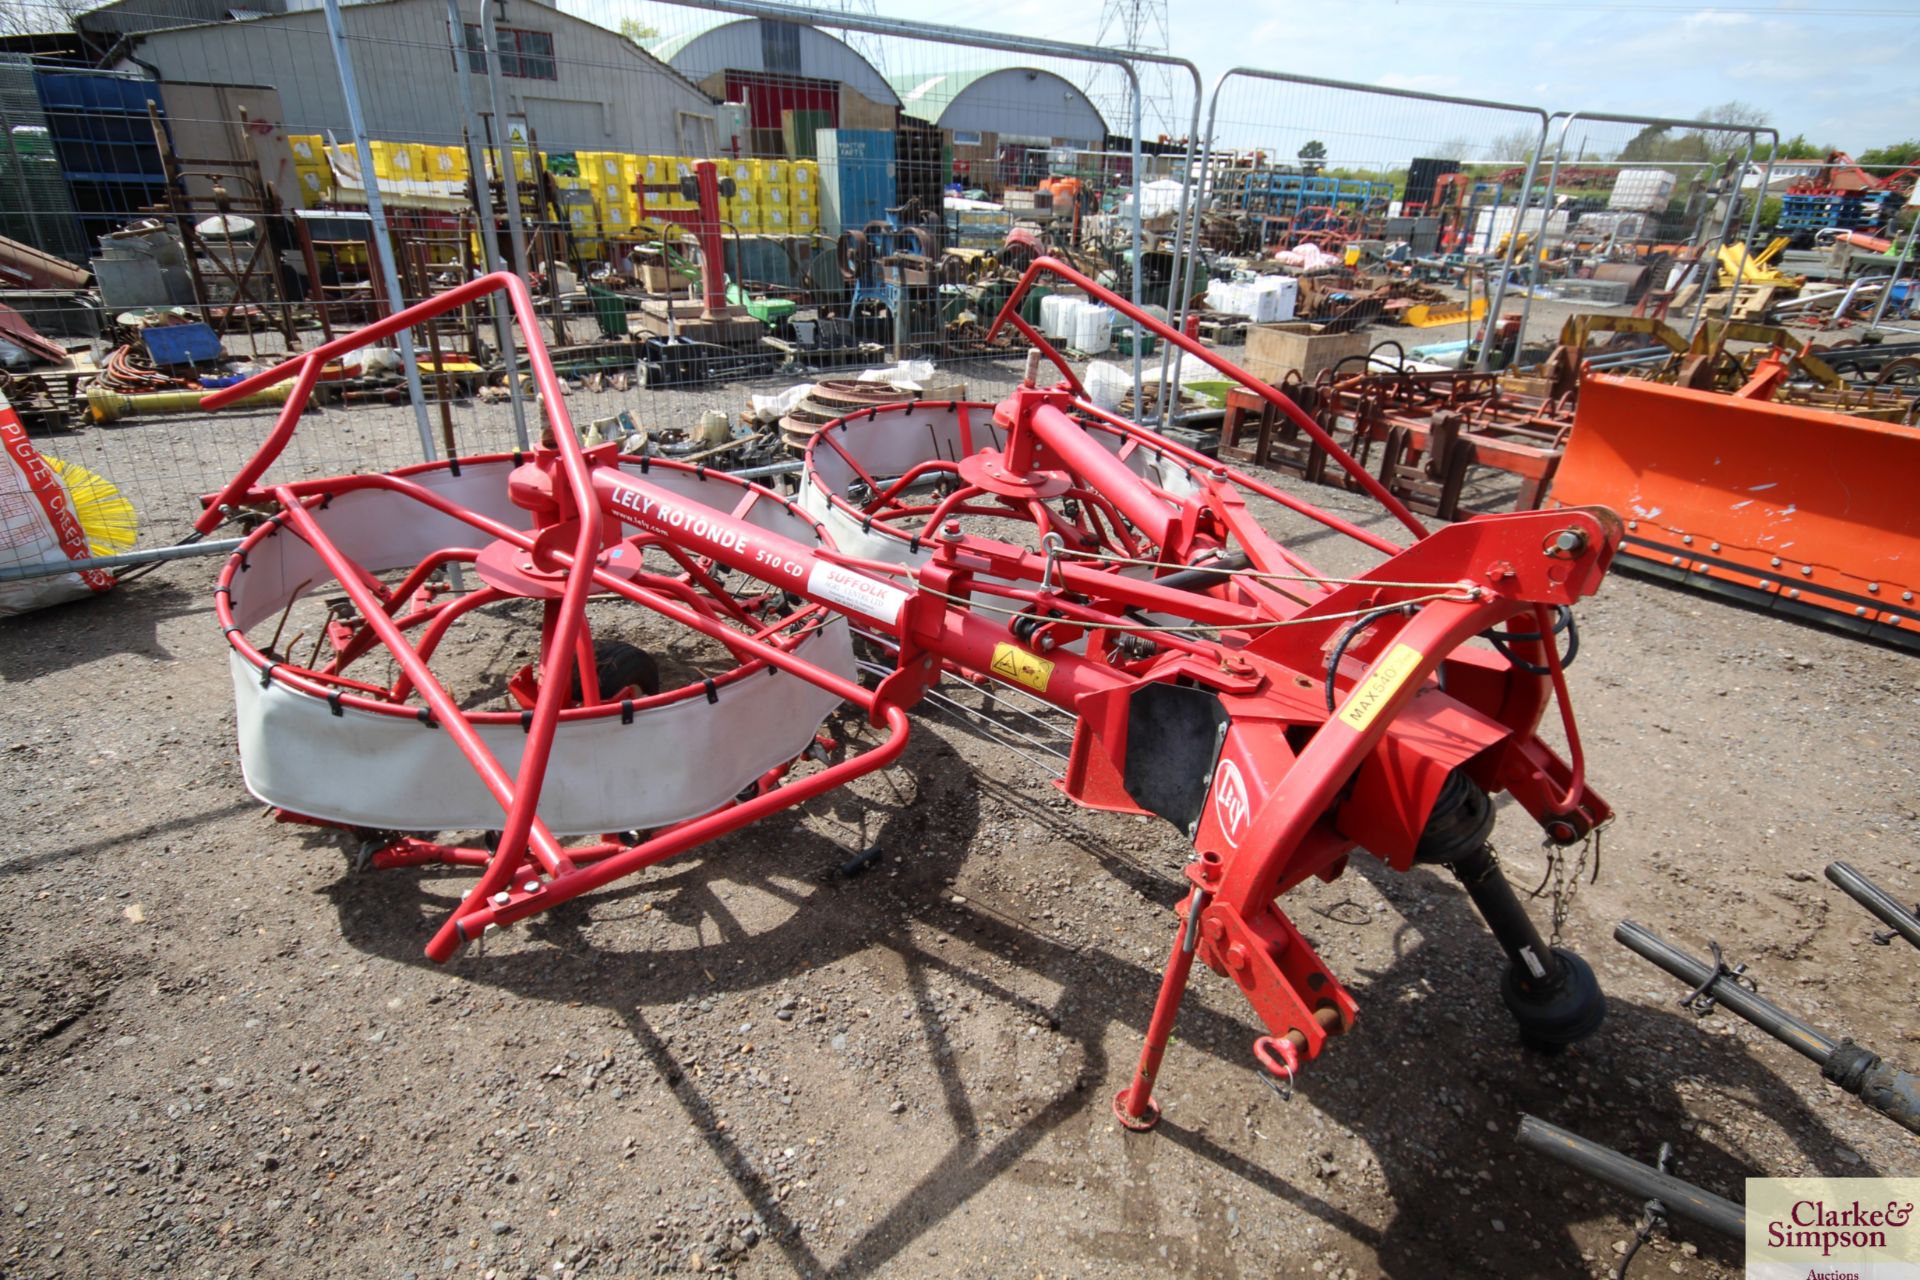 Lely Rotonde 510 CD Expanding Rotary Universal Windrower. 2012. Serial number 0003126808-2011. Owned